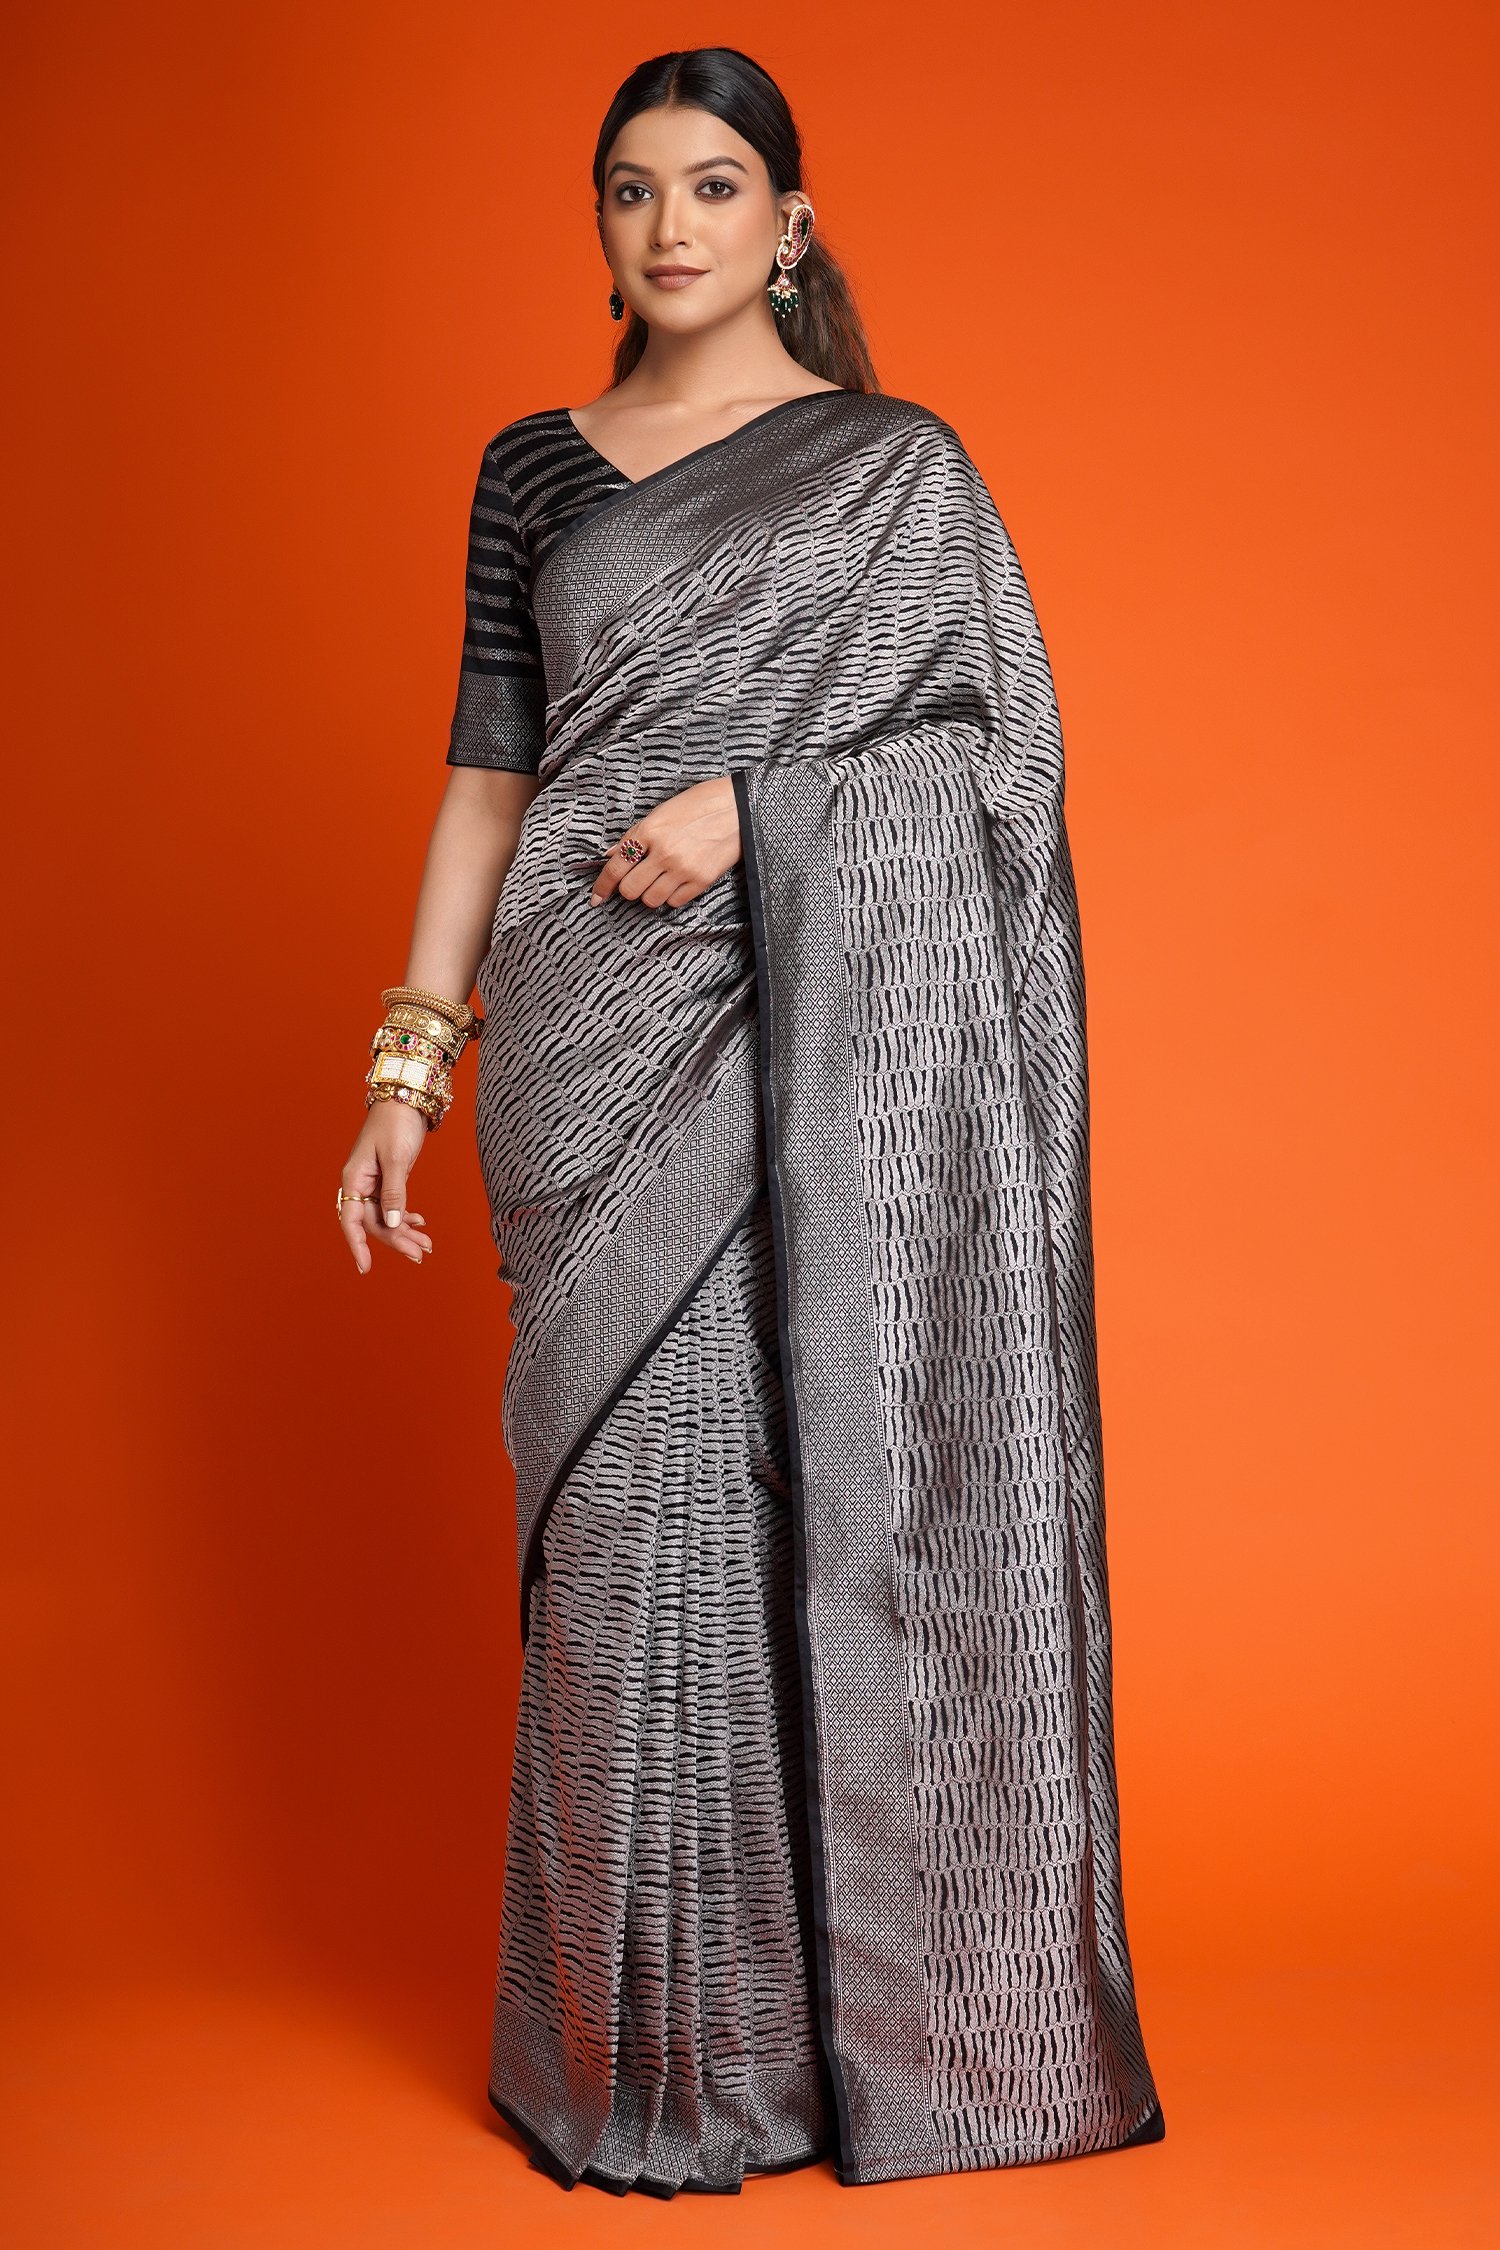 Buy Pure Silk Saree Online in India at Best Price | Taneira